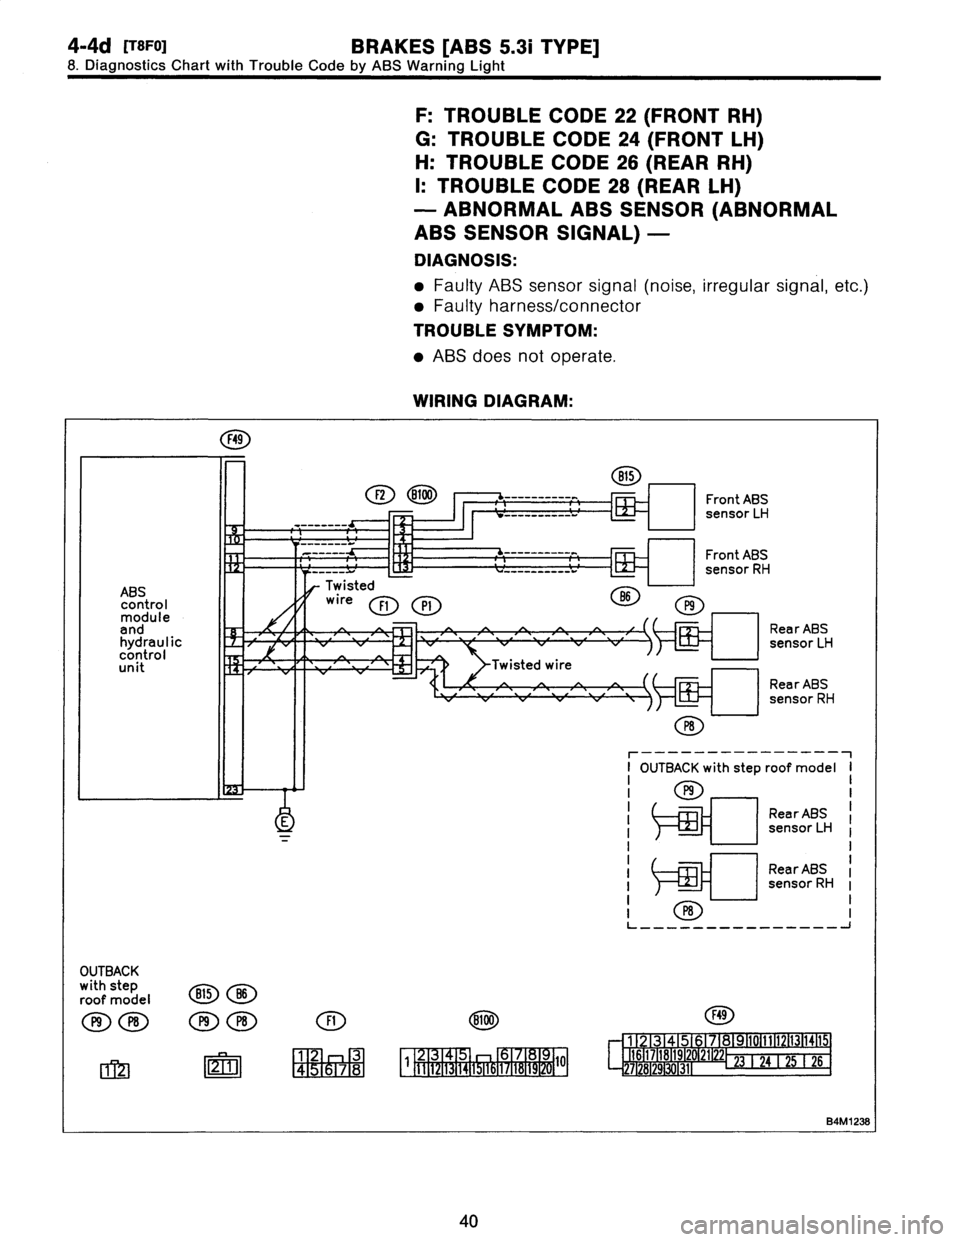 SUBARU LEGACY 1997  Service Repair Manual 
4-4d
[TSFO]
BRAKES
[ABS
5
.31
TYPE]
8
.
Diagnostics
Chart
with
Trouble
Code
by
ABS
Warning
Light

F
:
TROUBLE
CODE
22
(FRONT
RH)

G
:
TROUBLE
CODE
24
(FRONT
LH)

H
:
TROUBLE
CODE
26
(REAR
RH)

I
:
TR